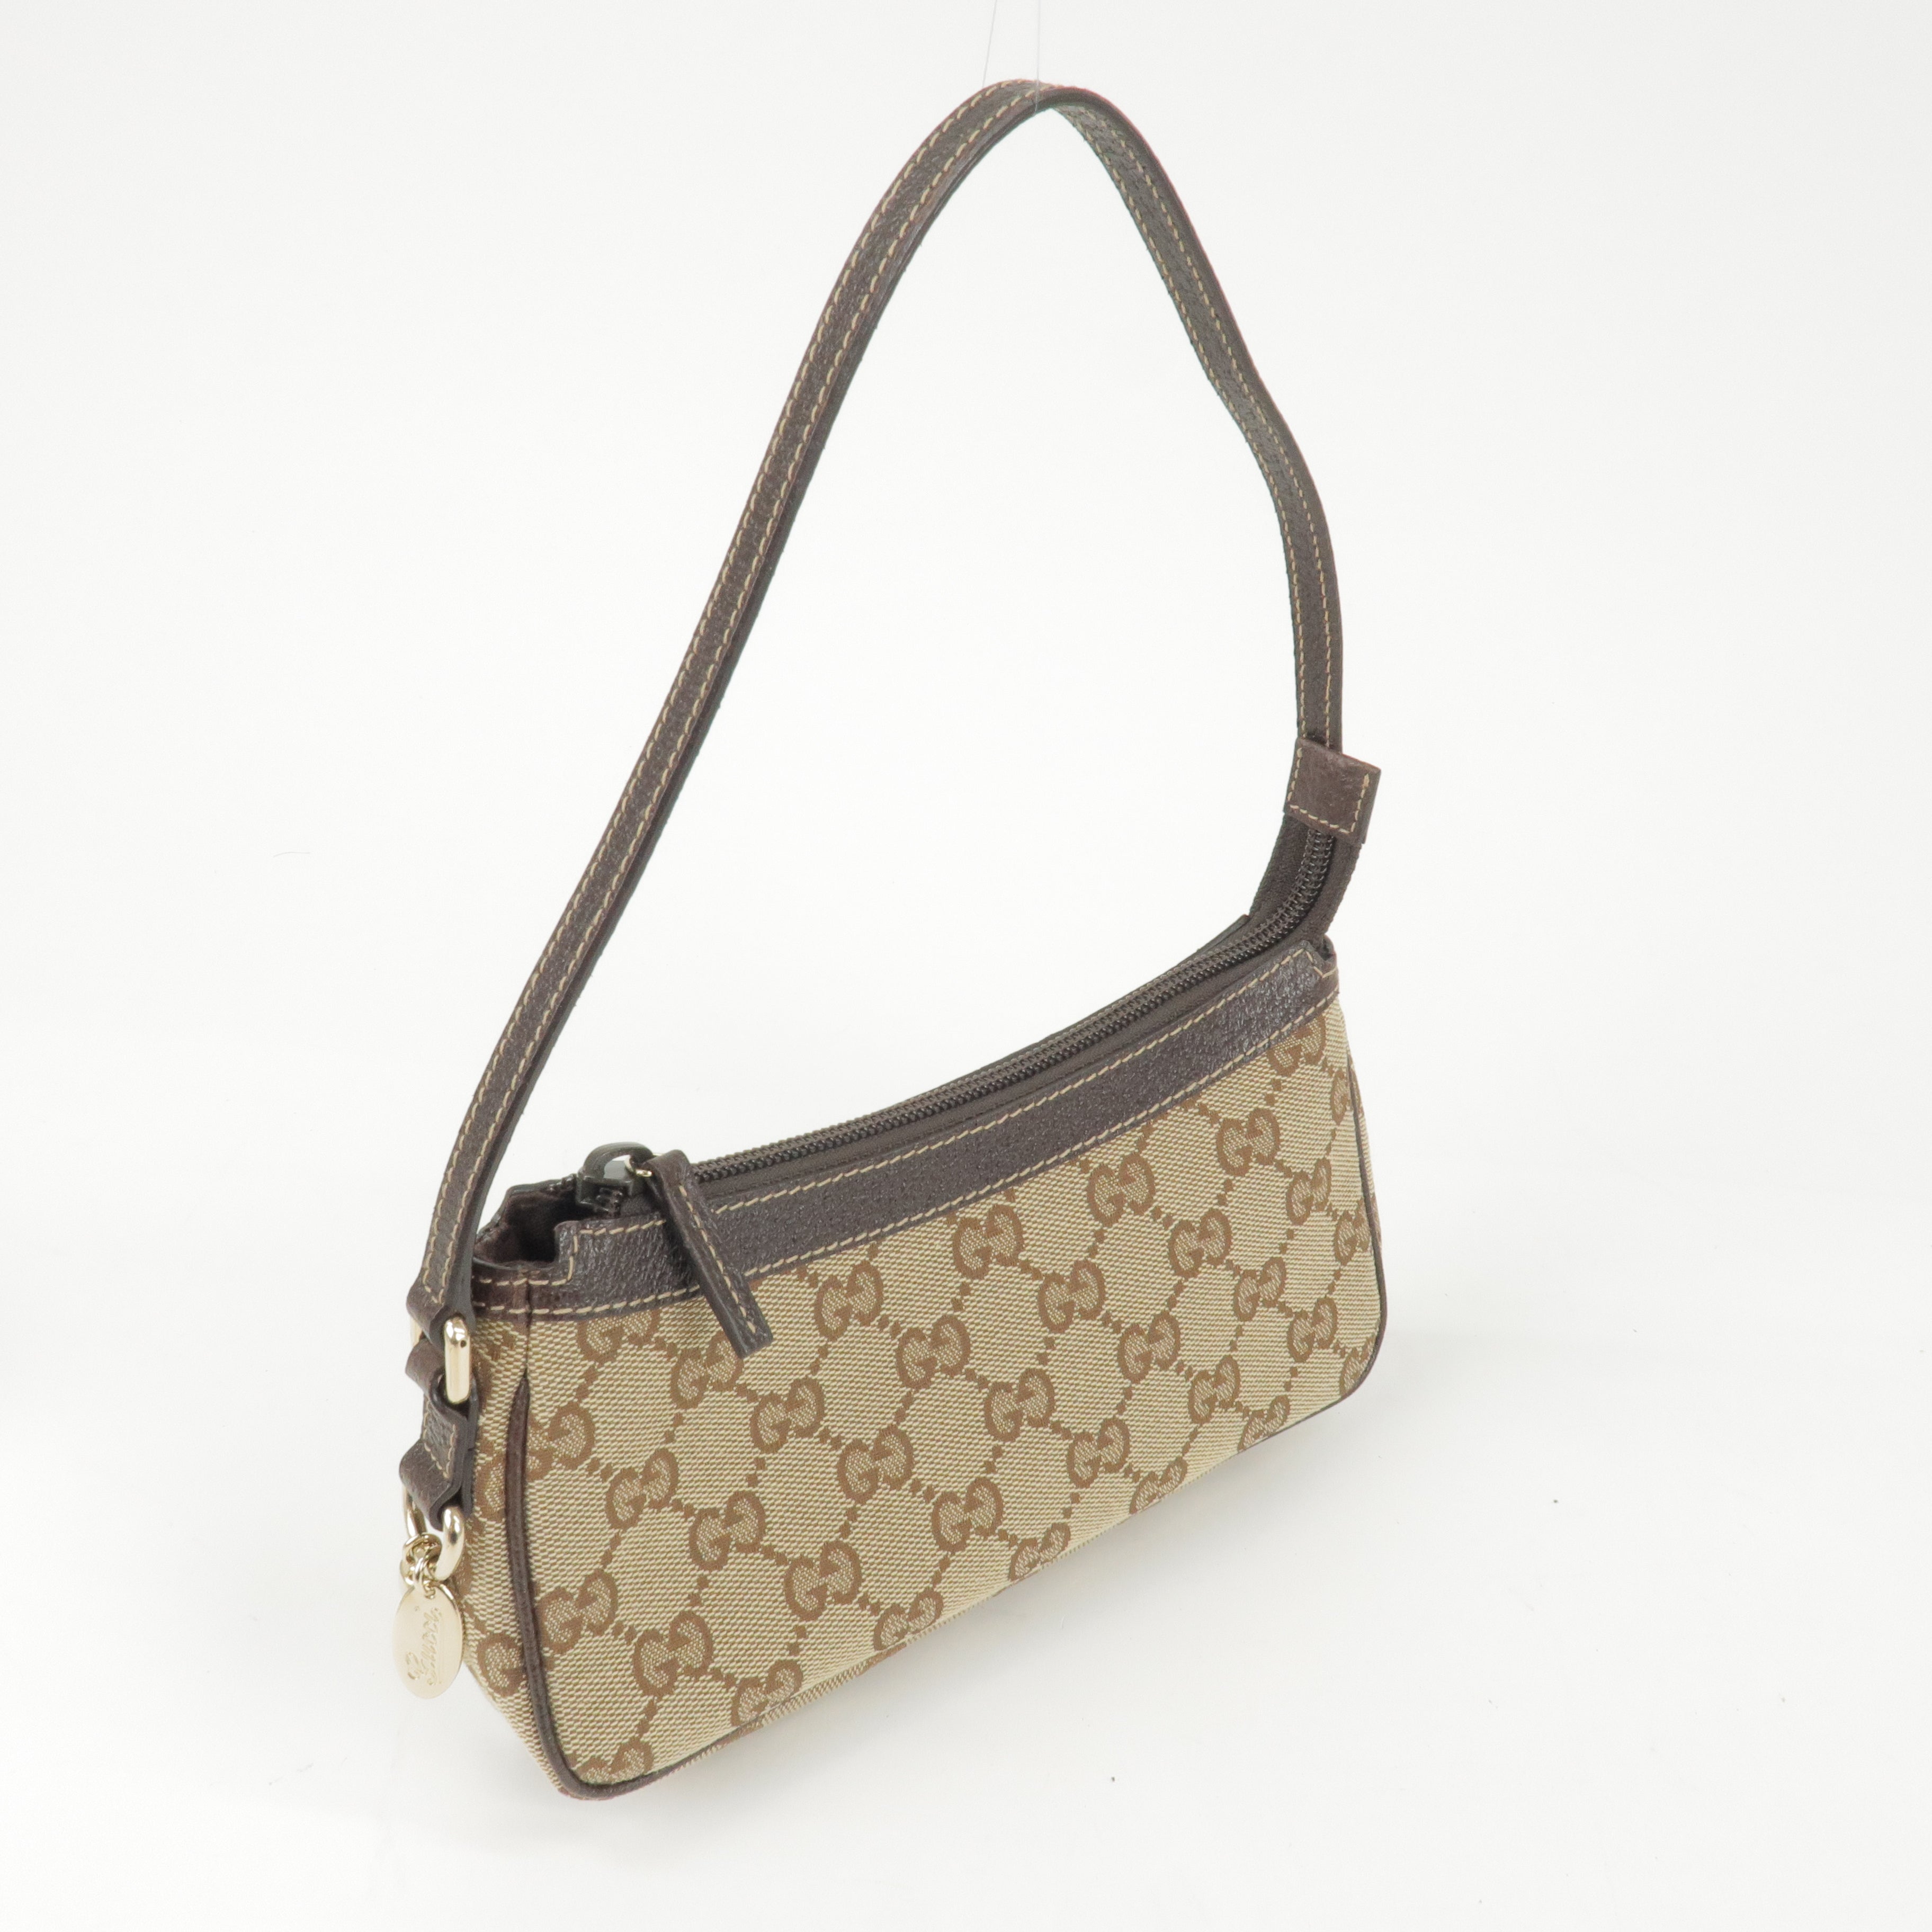 Gucci Bags, Purses & Accessories - Couture USA